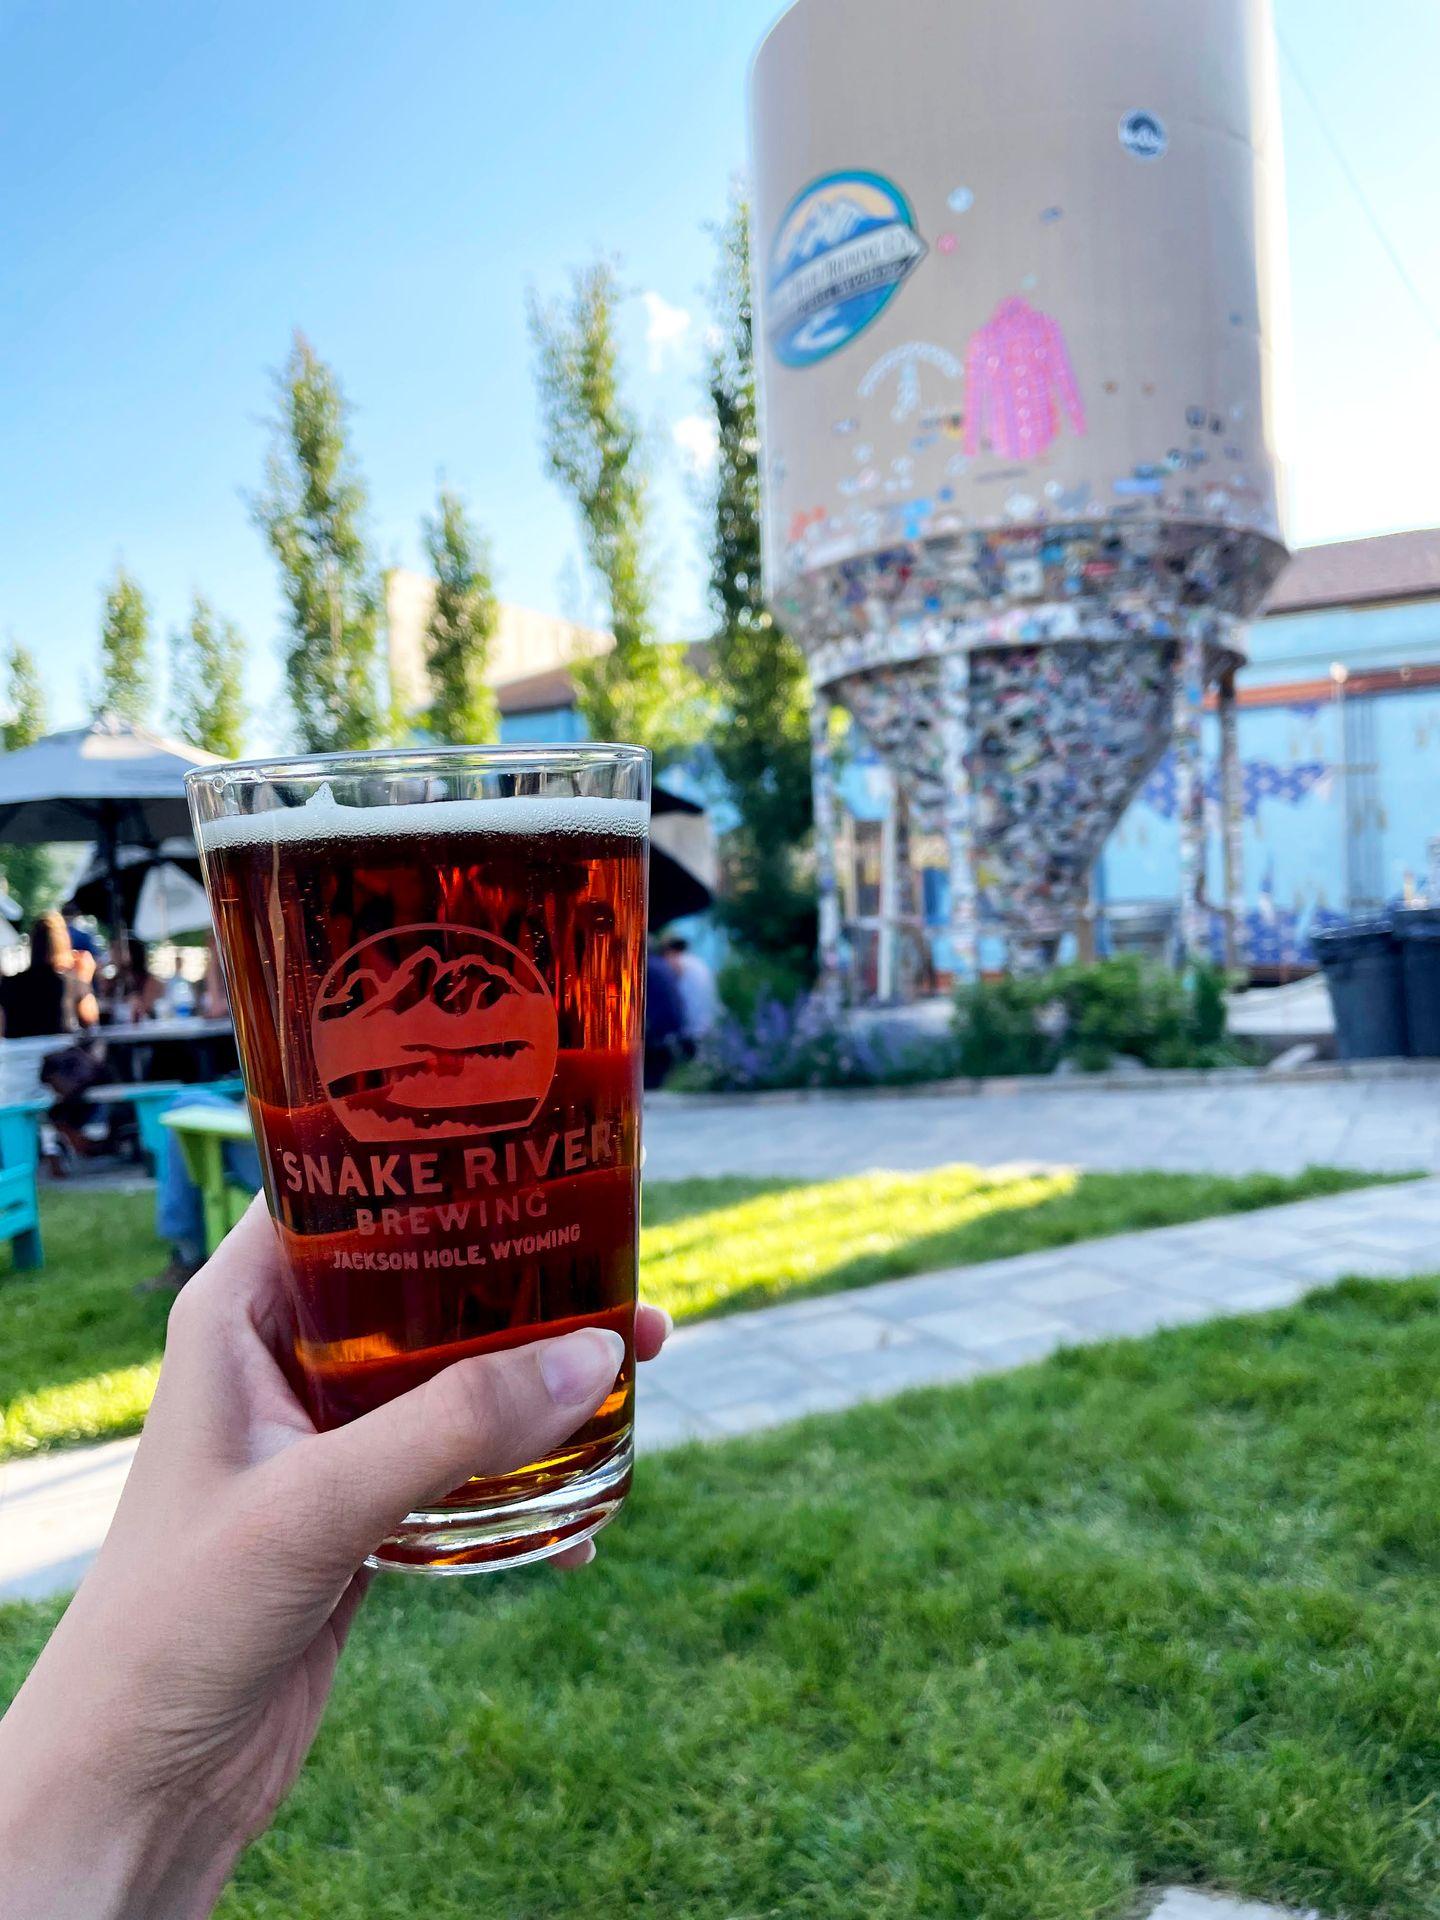 Holding up an amber colored glass of beer in the outdoor area of Snake River Brewing.